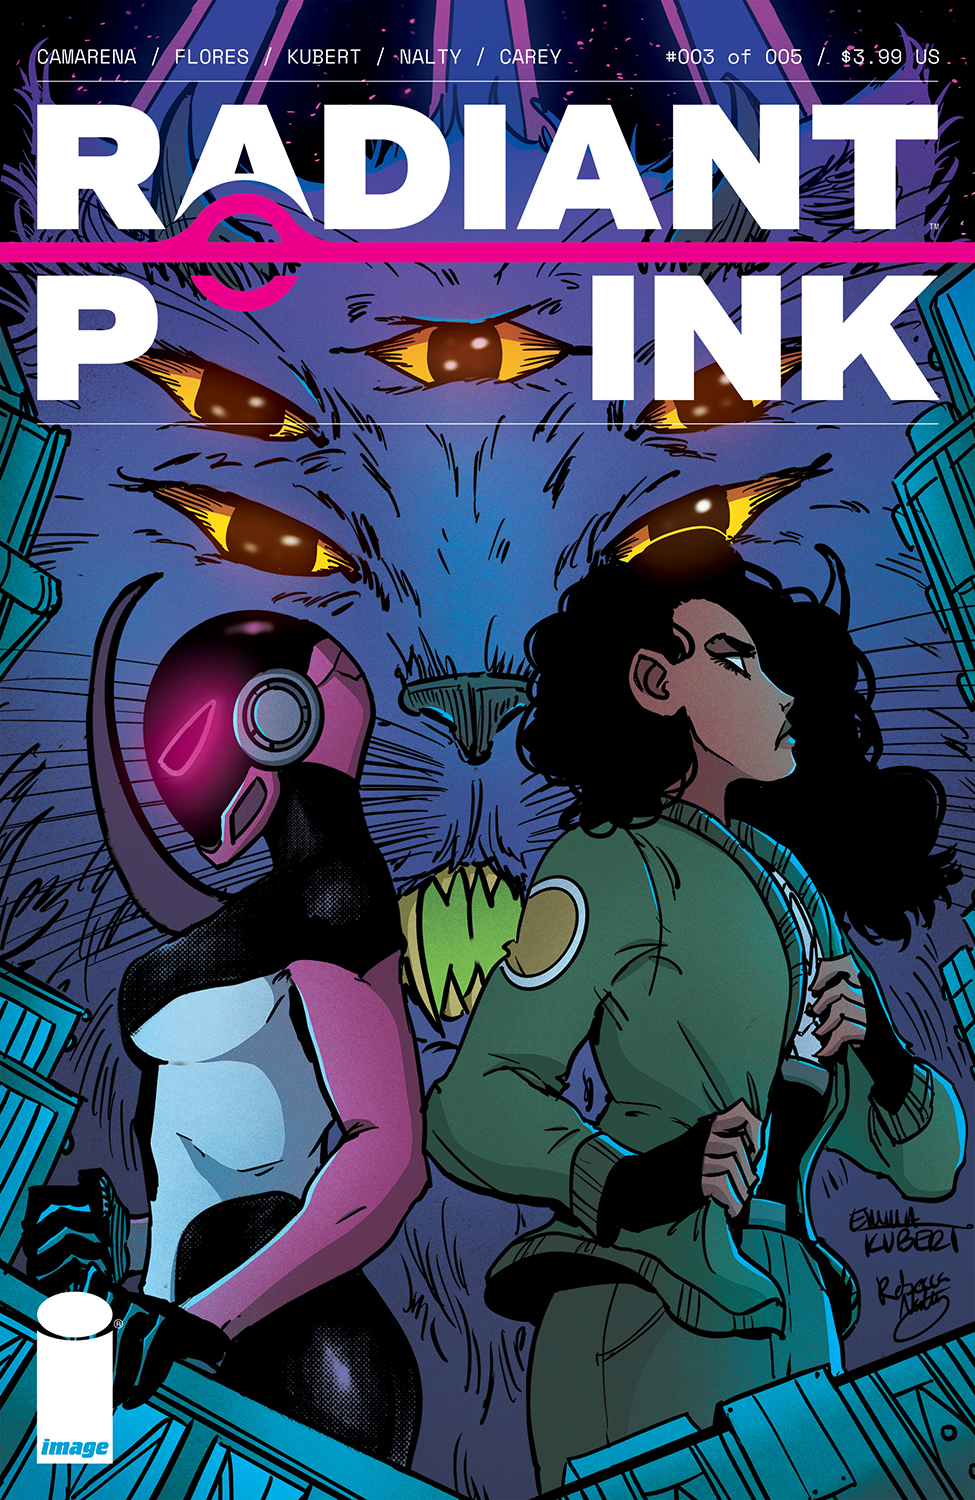 Radiant Pink #3 Cover A Kubert Mv (Of 5)